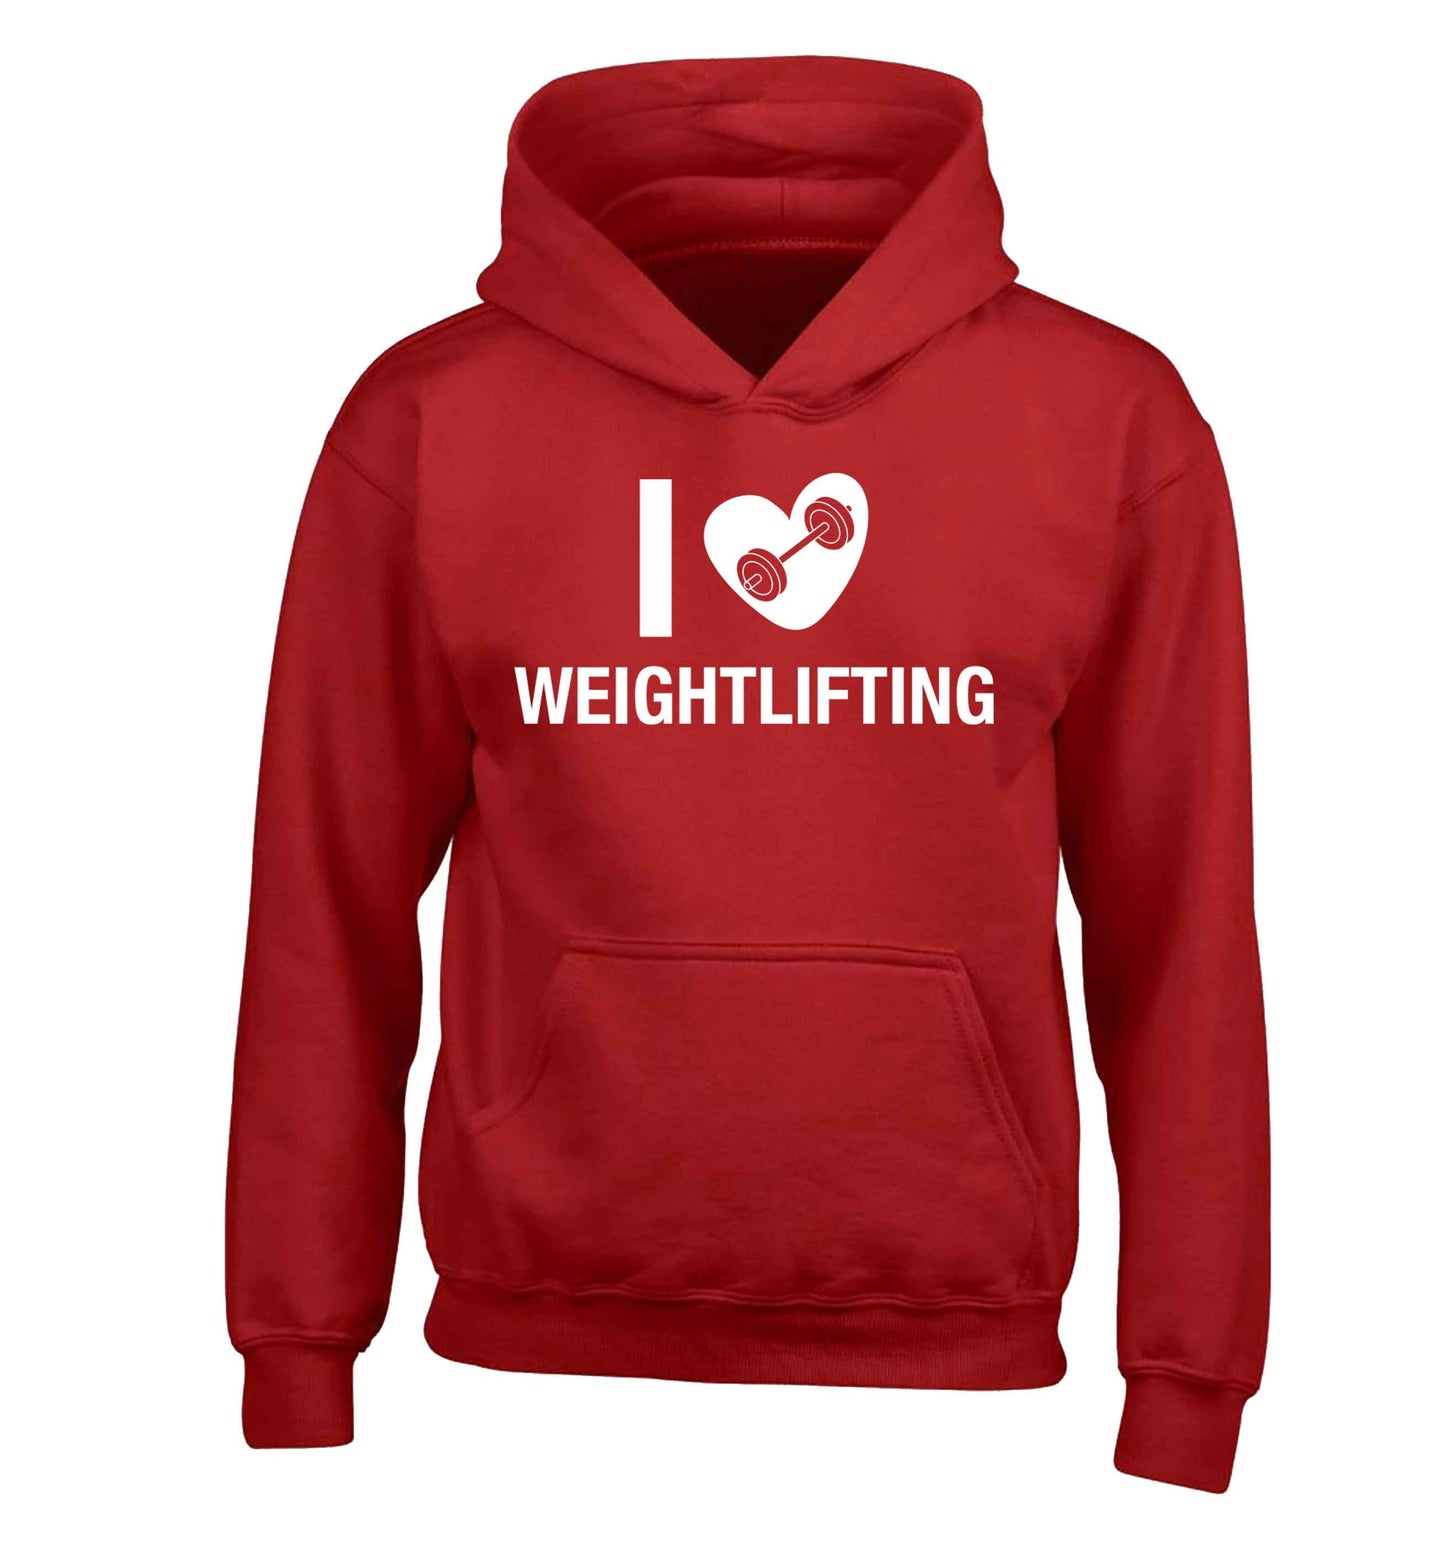 I love weightlifting children's red hoodie 12-13 Years